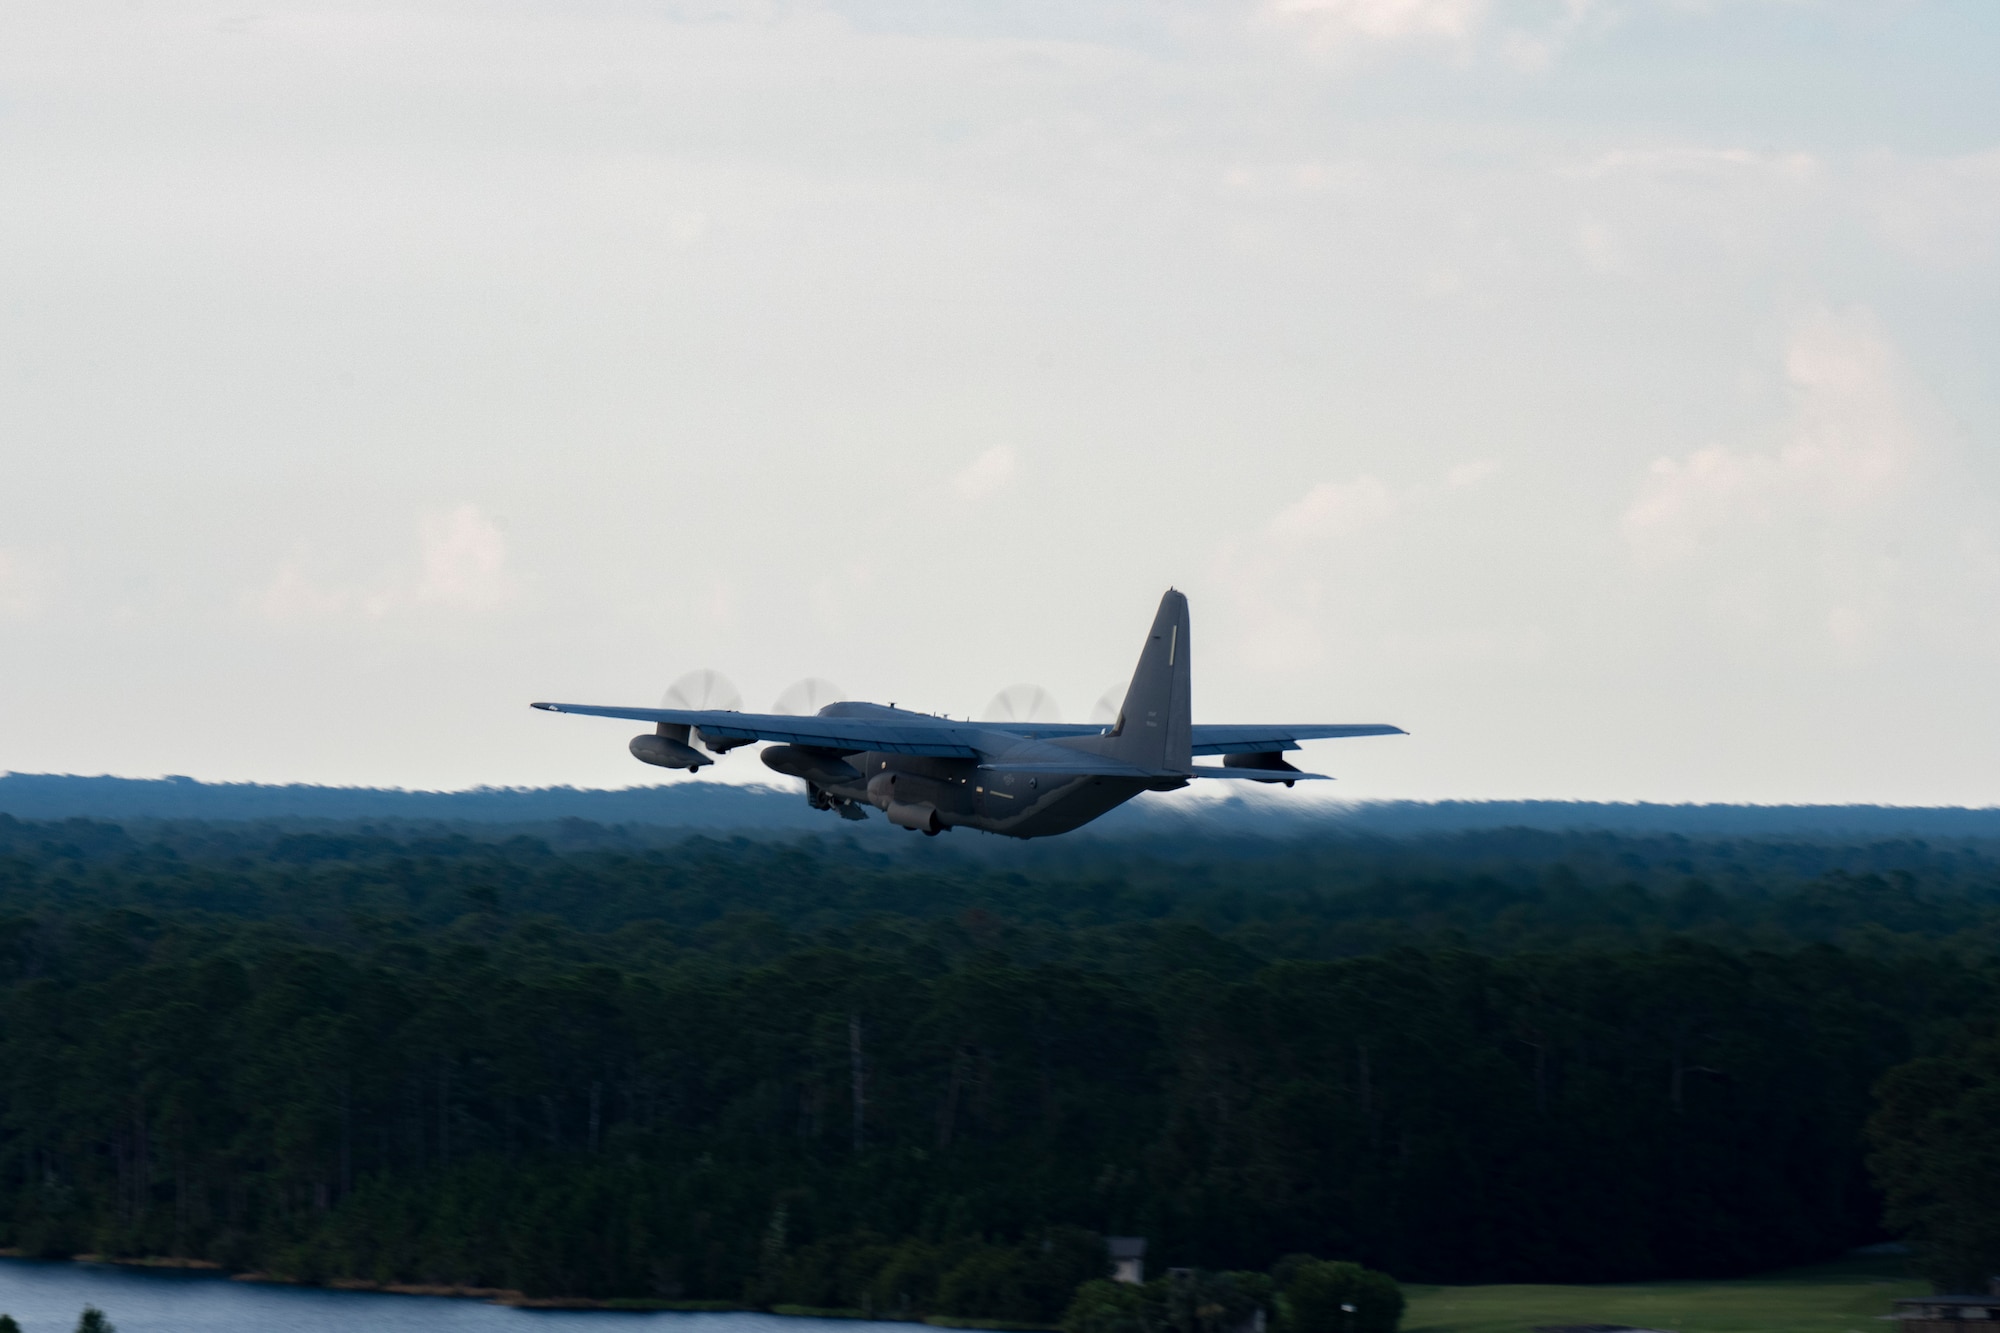 An MC-130J Commando II aircraft from the 1st Special Operations Wing takes off from Hurlburt Field, Florida, Jul. 6, 2023. The 1st Special Operation Wing, especially postured for rapid intervention in any crisis or conflict, launched two MC-130Js in support of U.S. Southern Command to enhance collective readiness, capability and contribute to regional security in the Western Hemisphere. (U.S. Air Force Photo by Airman 1st Class Hussein Enaya)